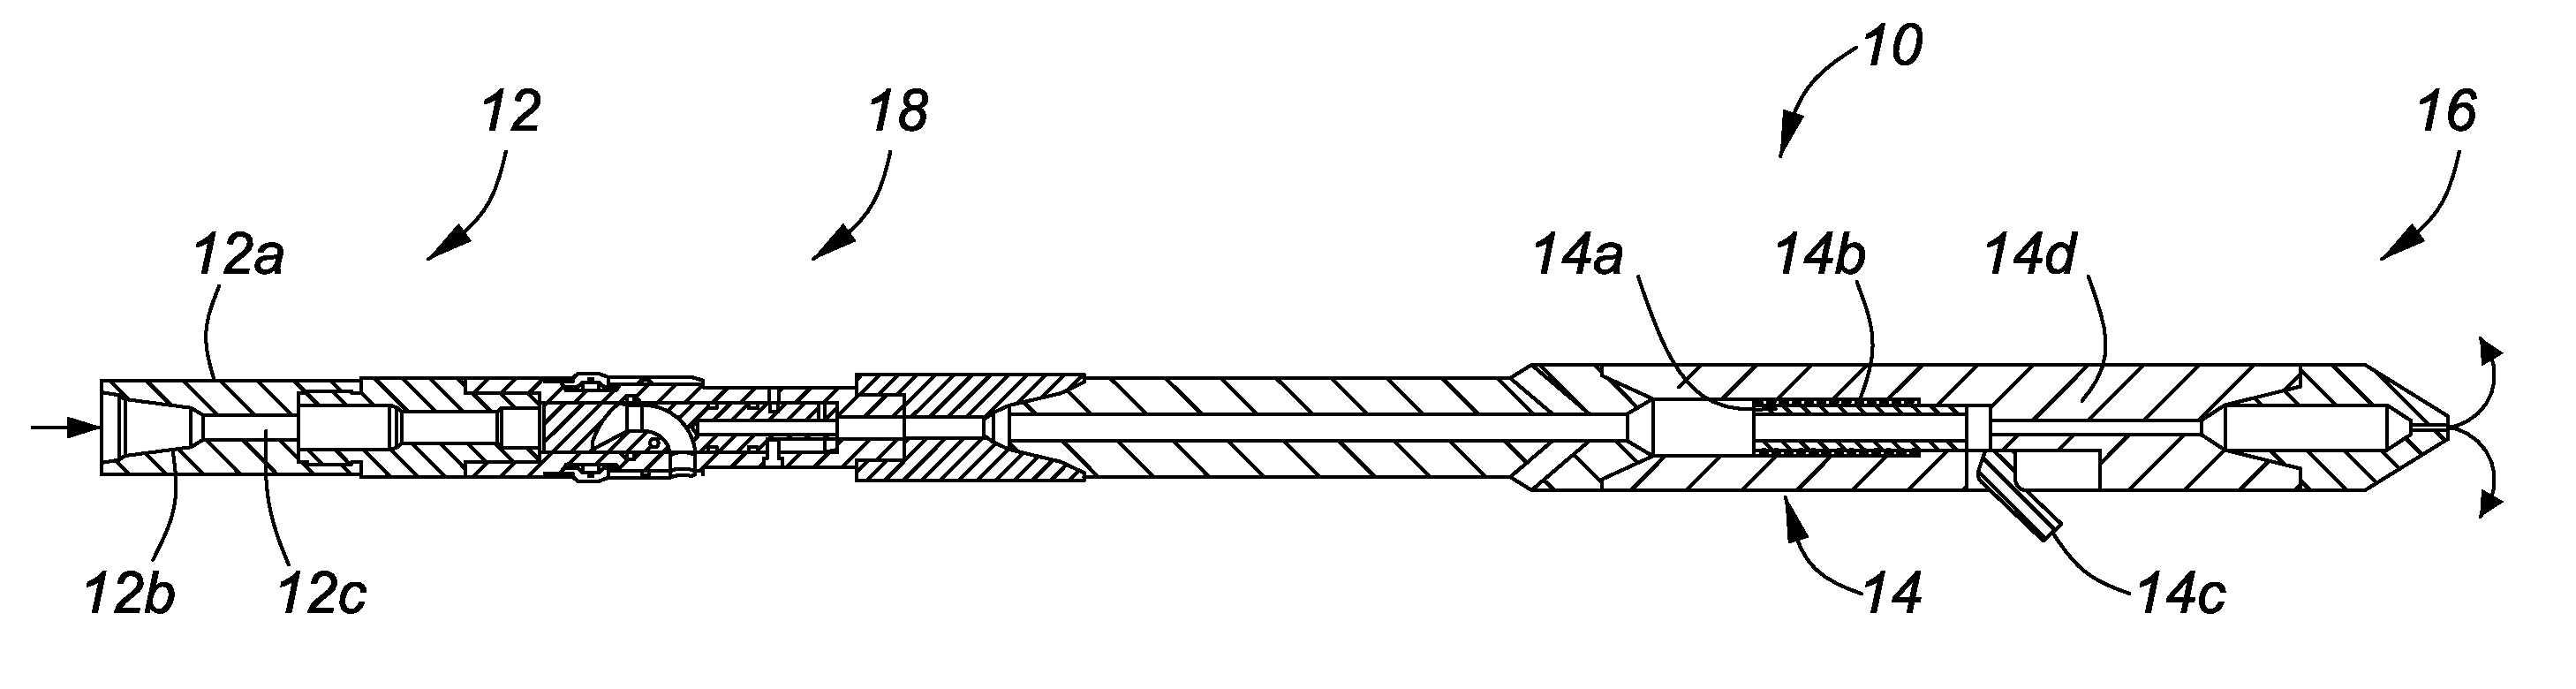 System and method for longitudinal and lateral jetting in a wellbore